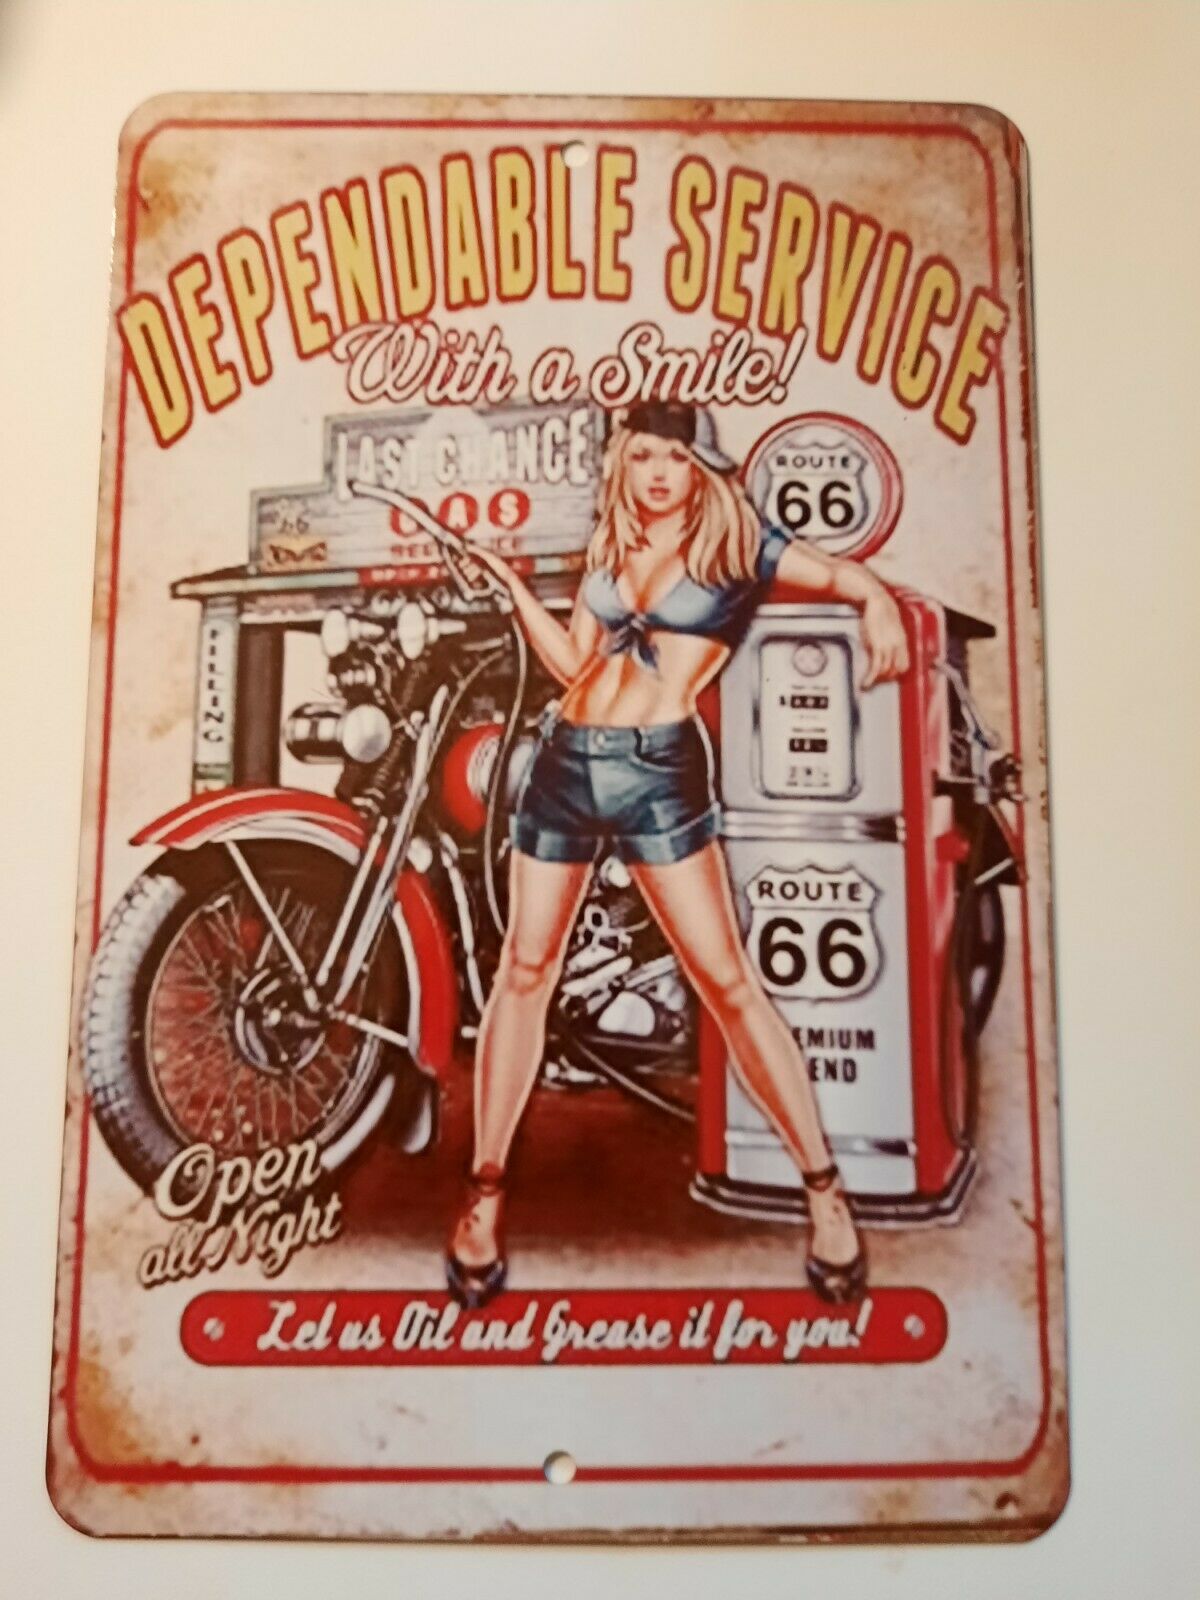 Route 66 Dependable Service with a Smile 8x12 Metal Wall Garage Man Cave Motorcycle Sign Garage Poster